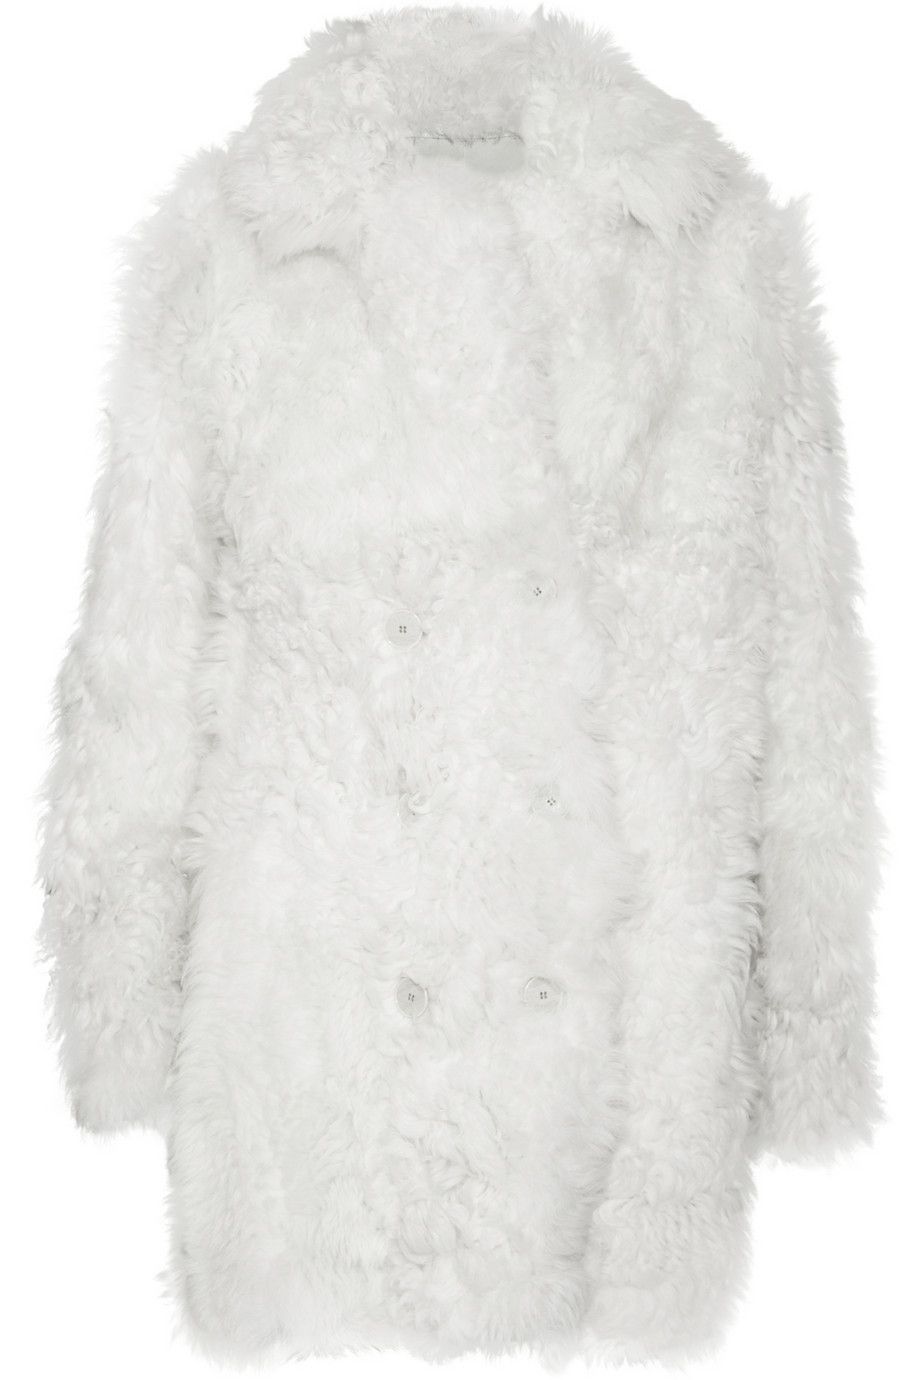 Textile, White, Grey, Natural material, Fur, Wool, Woolen, Fur clothing, Silver, Animal product, 